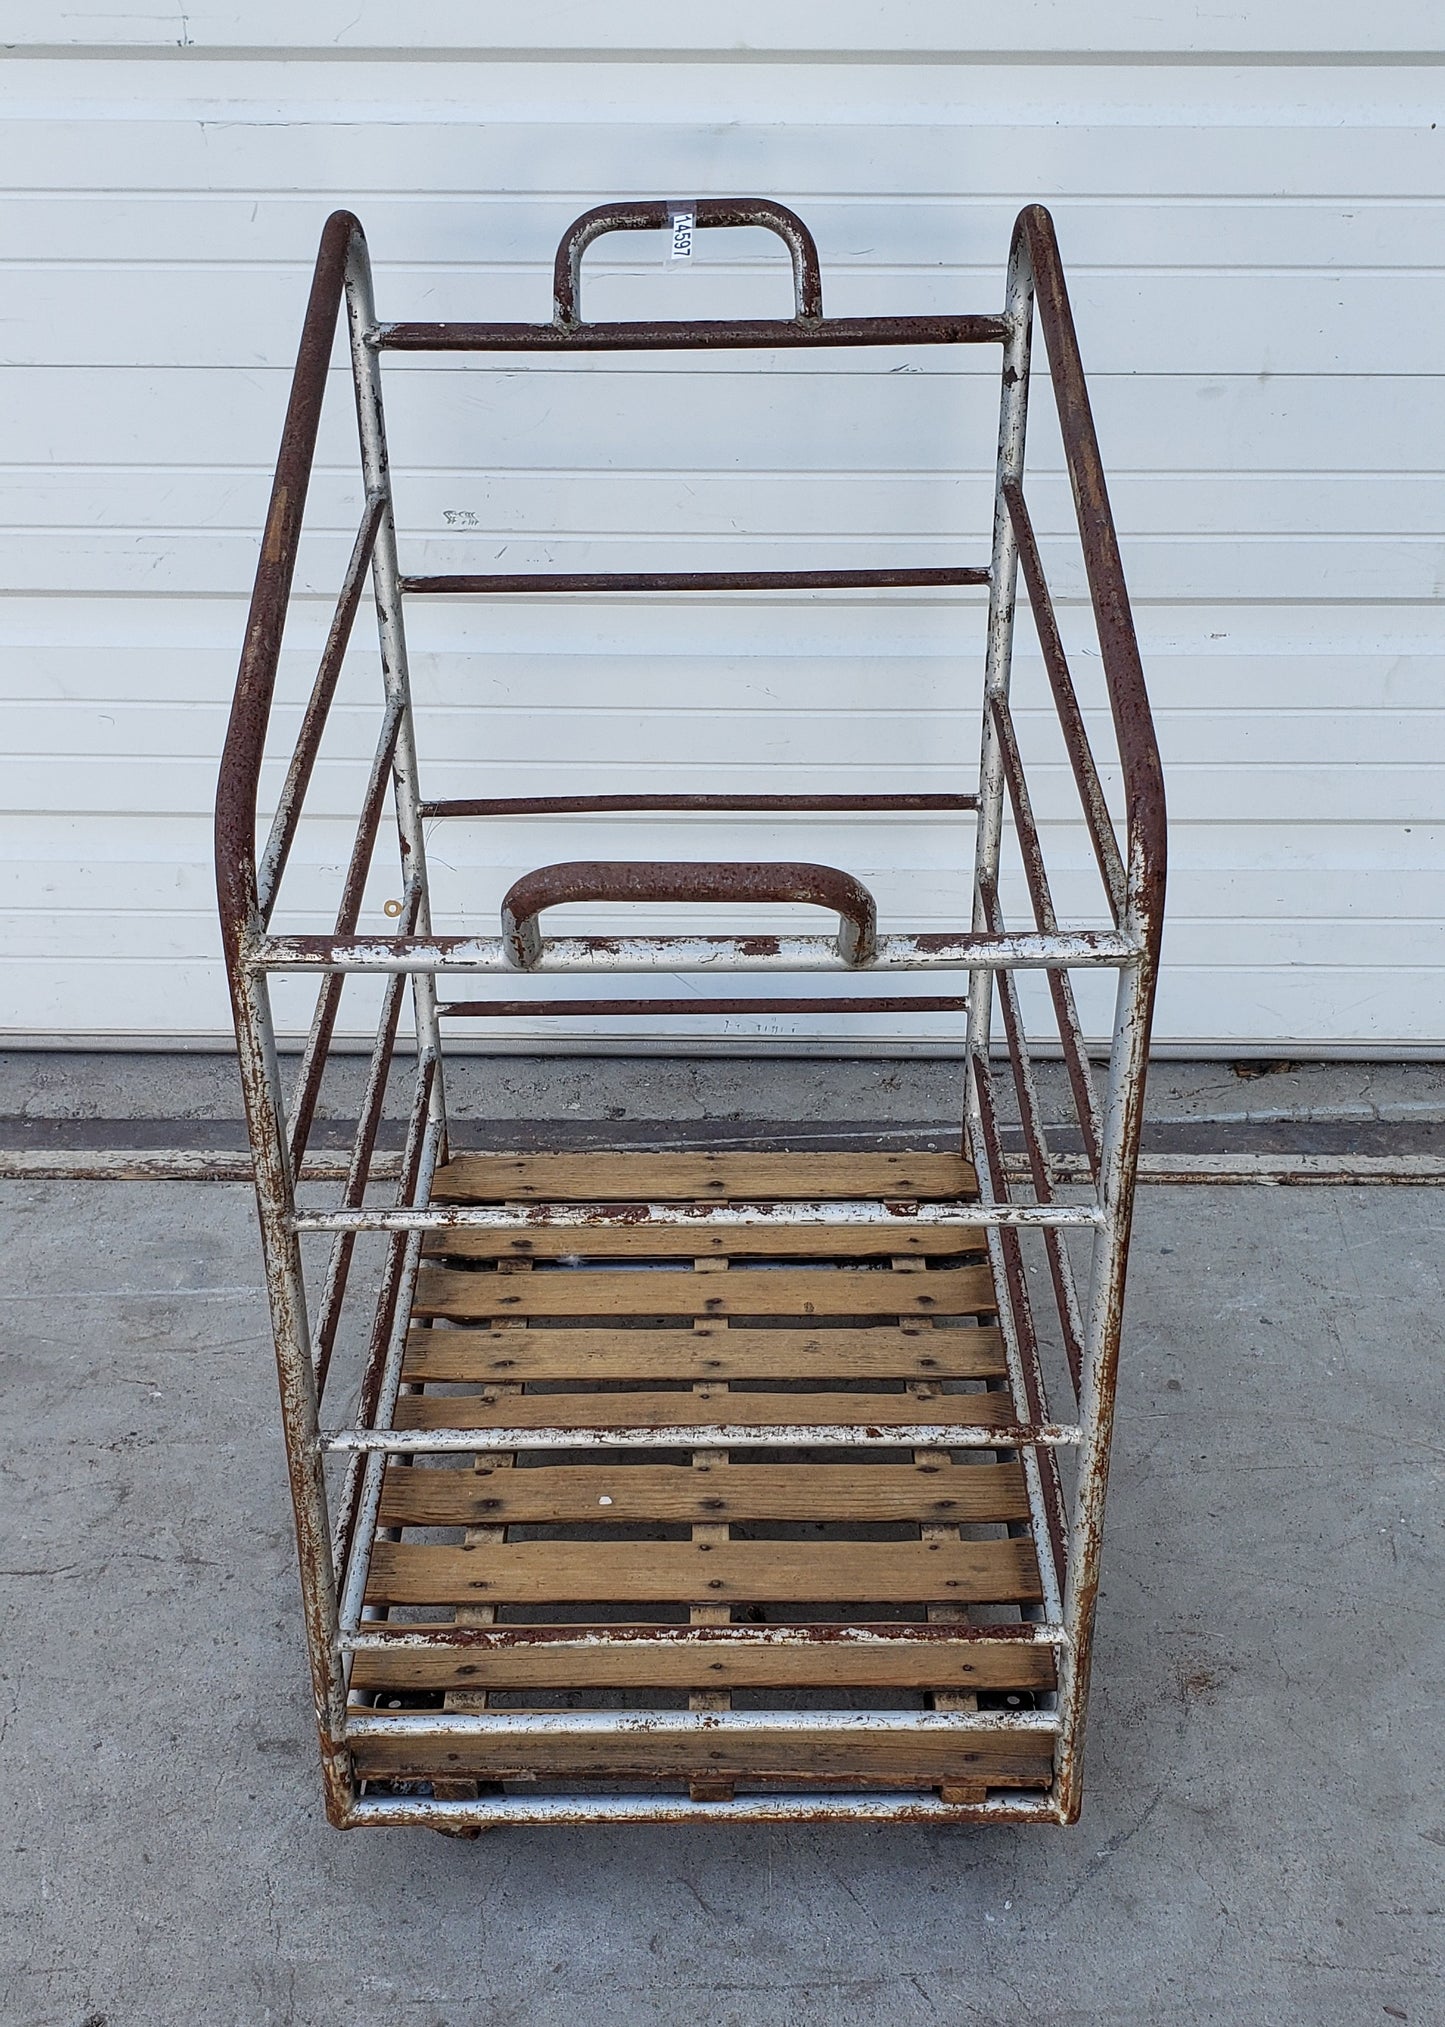 French Baguette Trolley